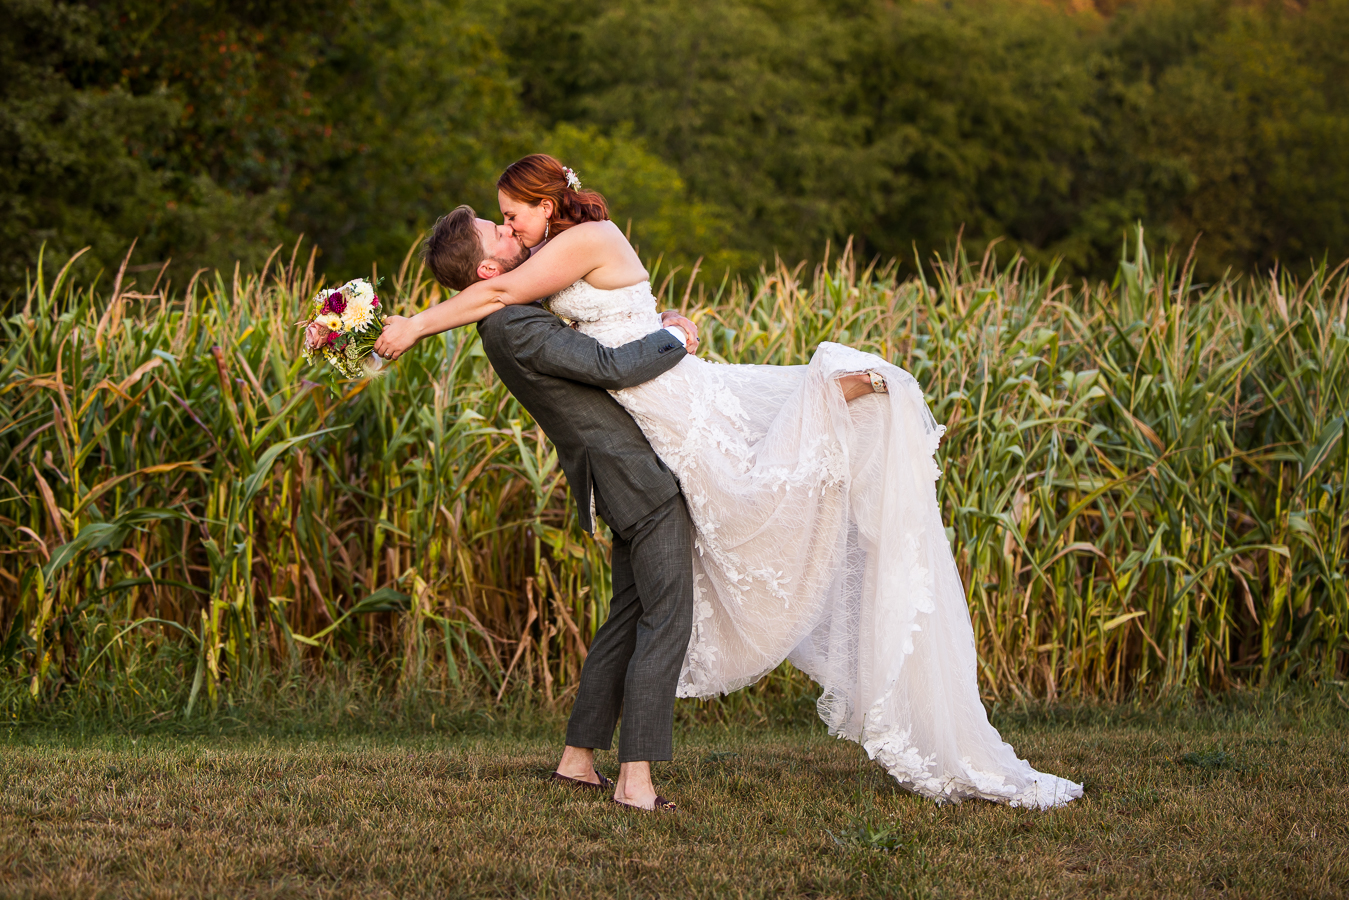 pa wedding photographer, lisa rhinehart, captures this image of the bride and groom he lifts the bride up and kiss one another as they stand against the corn field behind them at this warfordsburg pa wedding venue, alpine acres